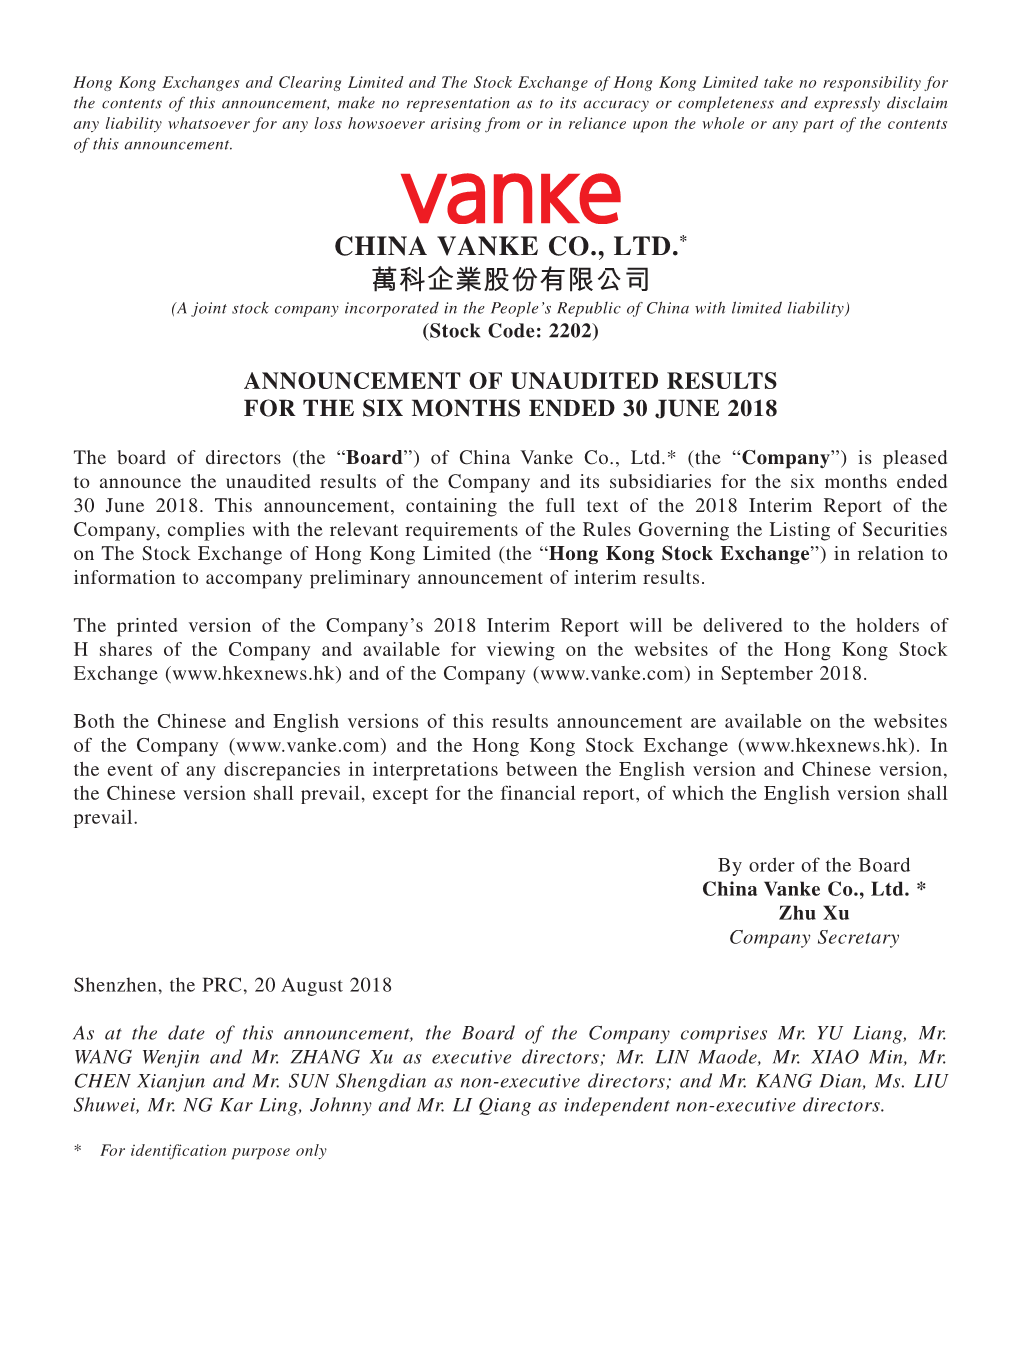 CHINA VANKE CO., LTD.* 萬科企業股份有限公司 (A Joint Stock Company Incorporated in the People’S Republic of China with Limited Liability) (Stock Code: 2202)